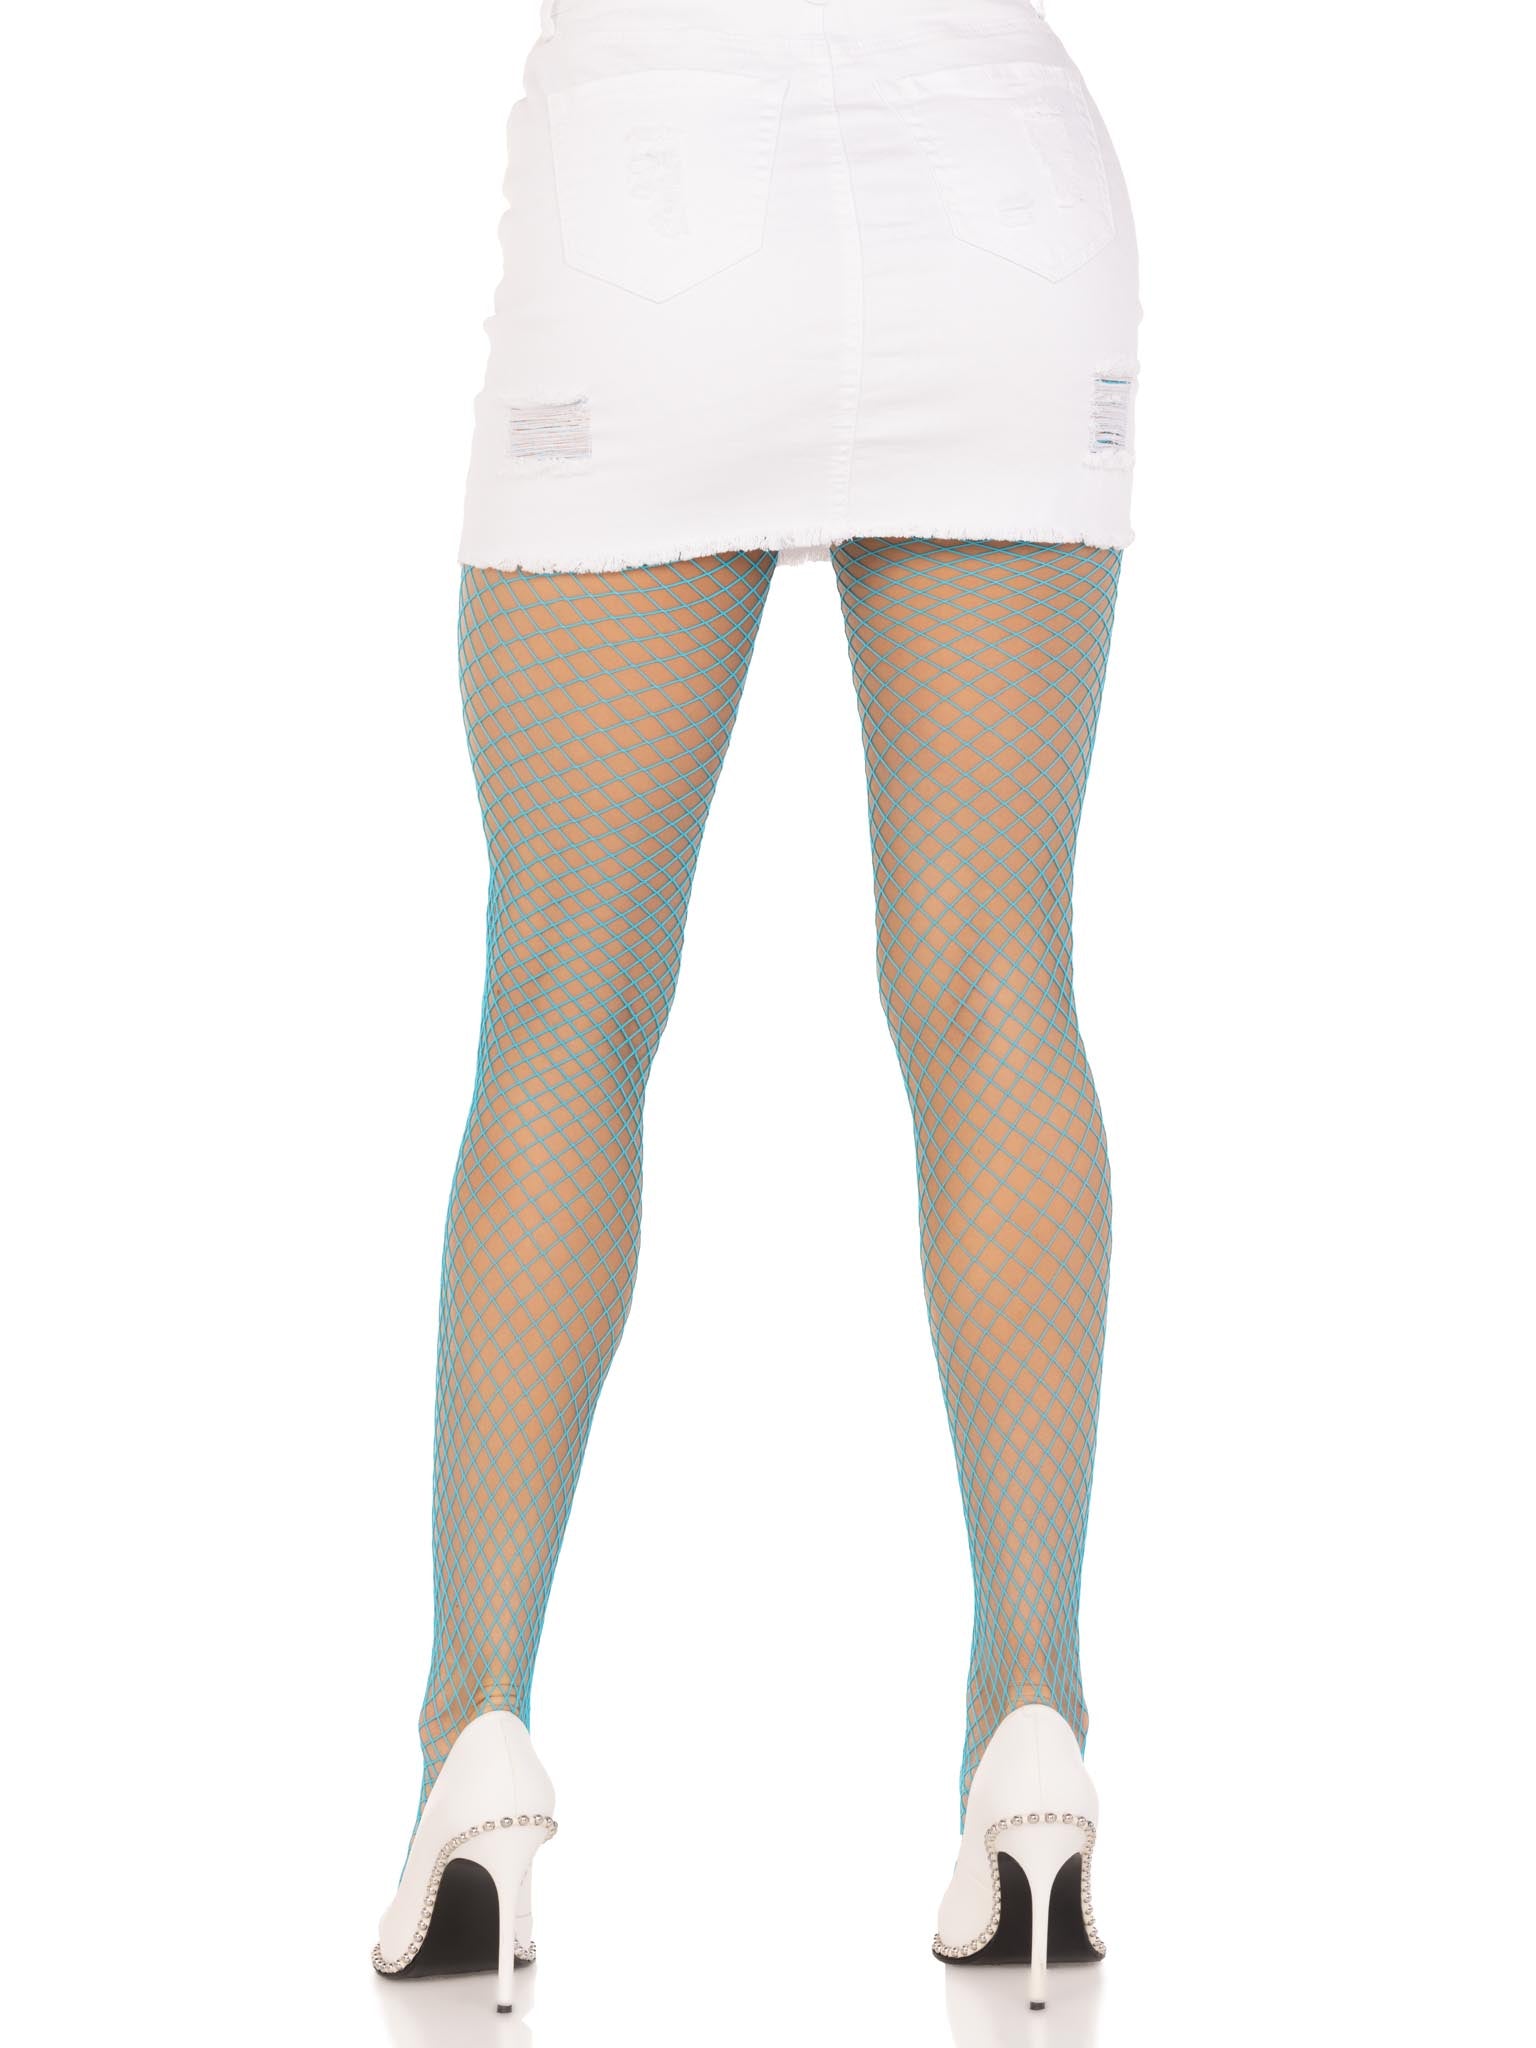 INDUSTRIAL NET TIGHTS, White Spandex Fishnet Pantyhose, Dancewear, Cosplay  Costumes, Pin up Stockings -  Norway